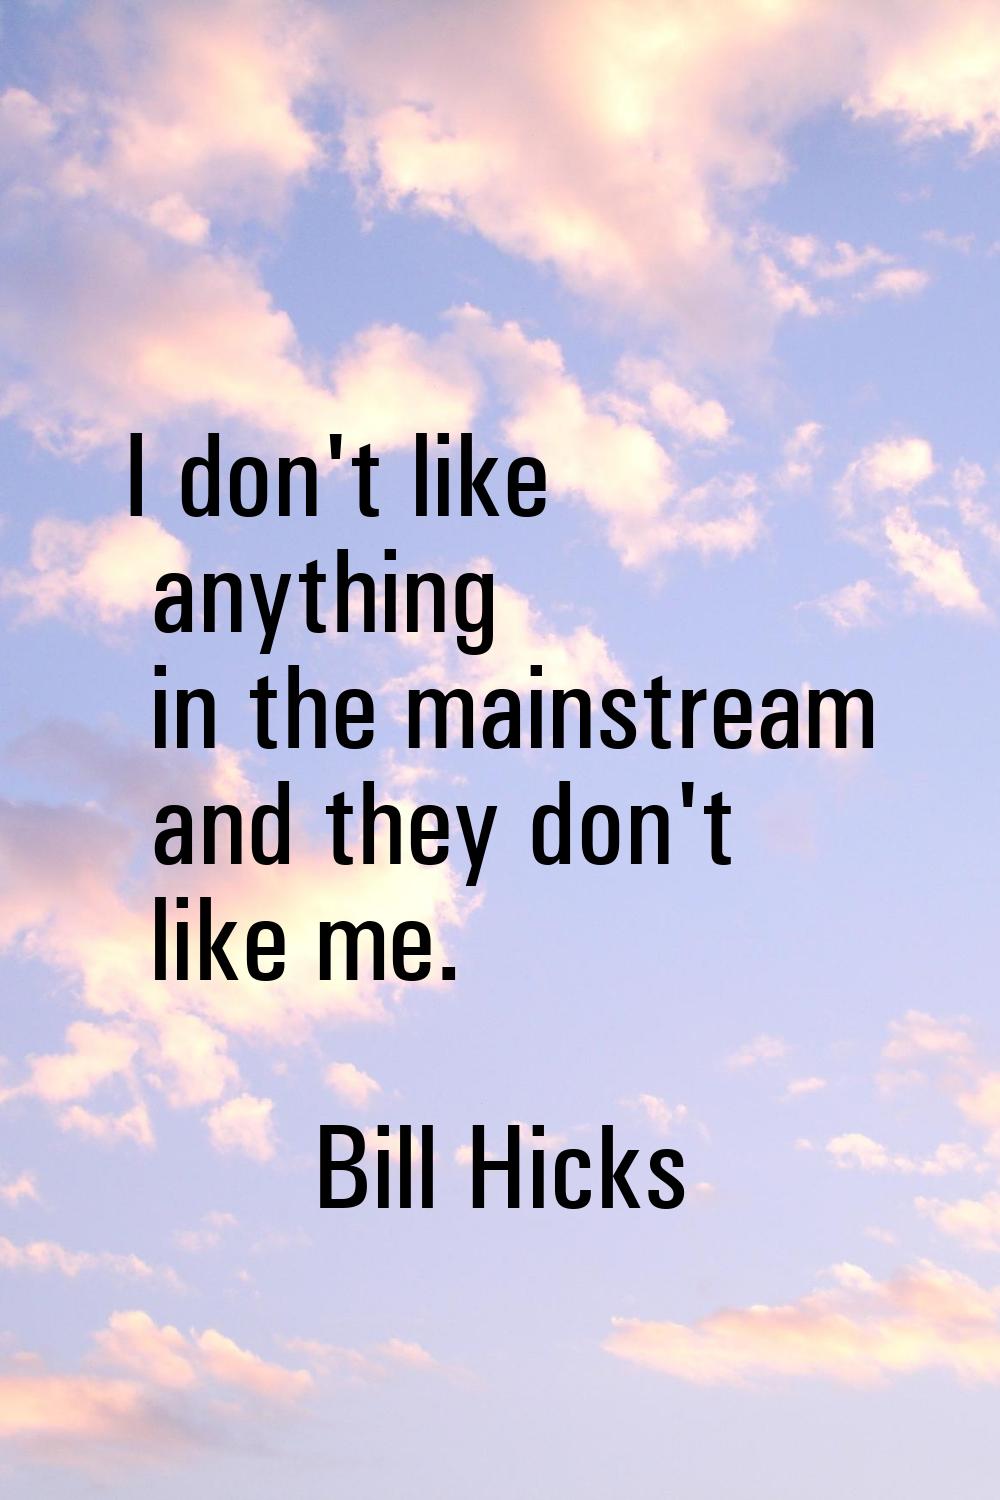 I don't like anything in the mainstream and they don't like me.